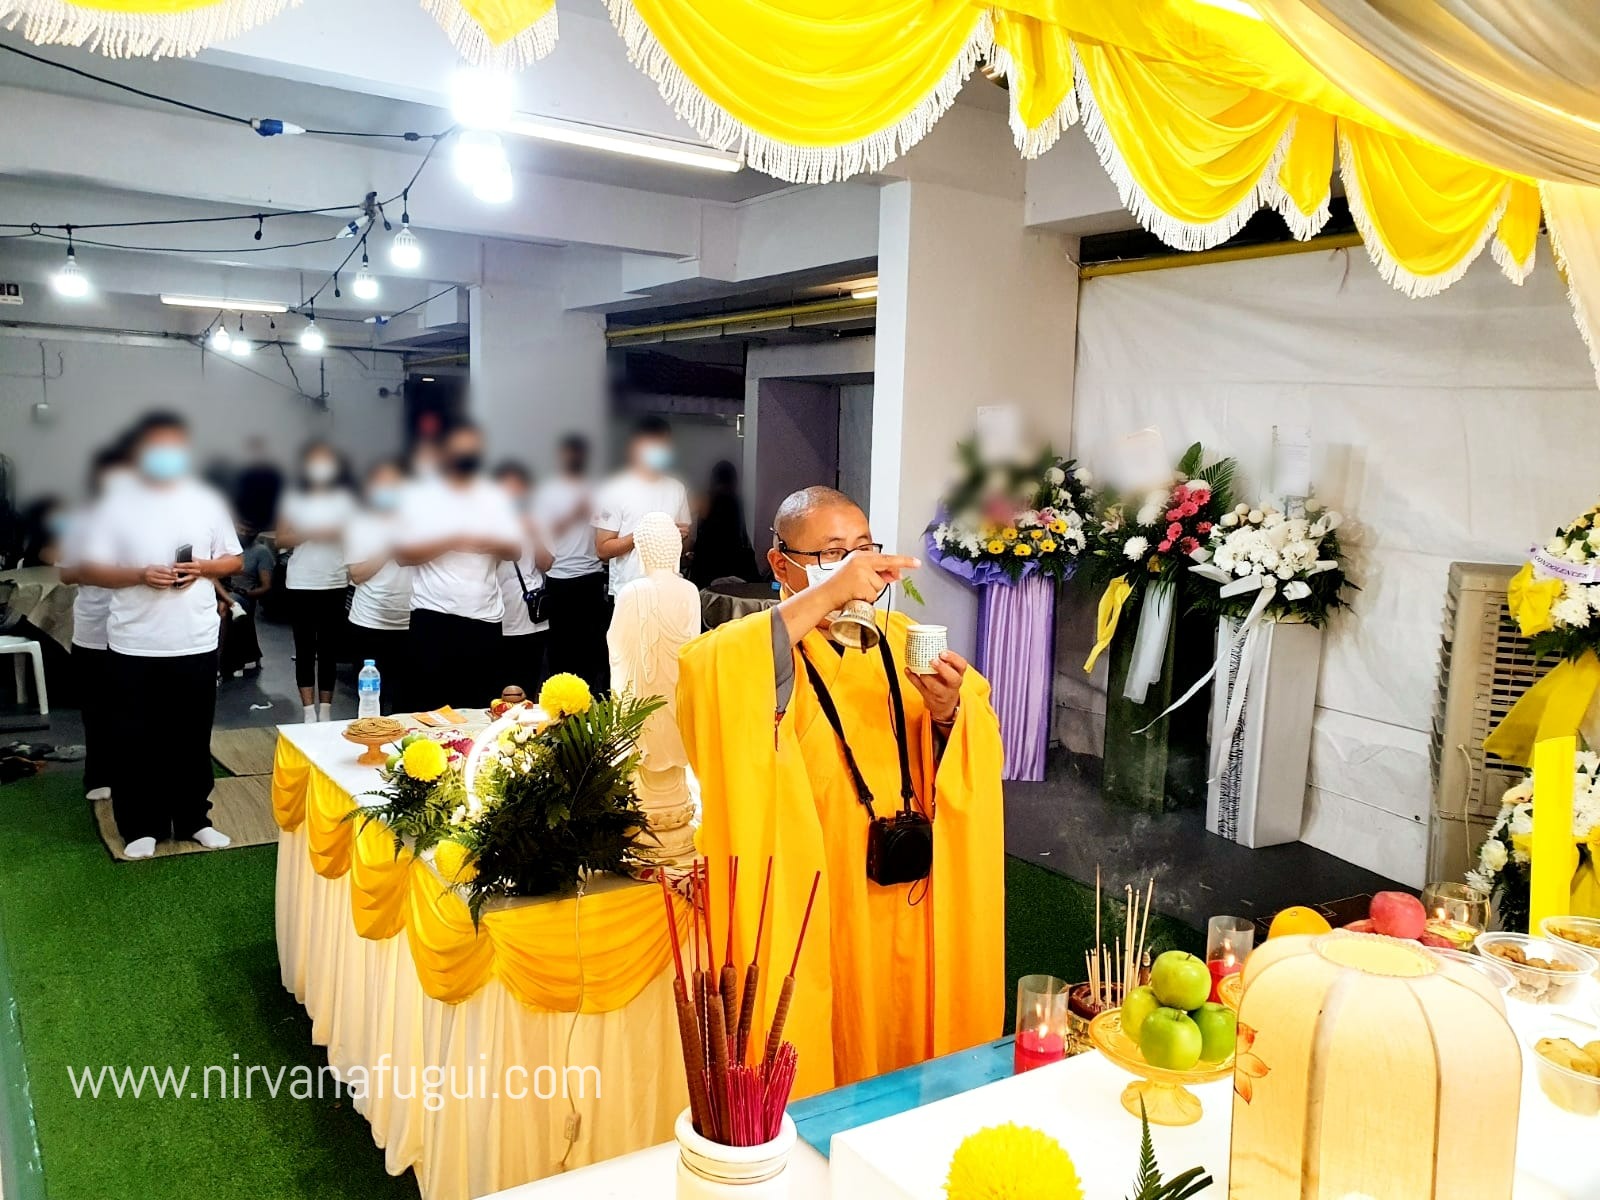 During a Buddhist funeral rite, the children, grandchildren, and younger relatives of the deceased gathered and pray for their beloved deceased